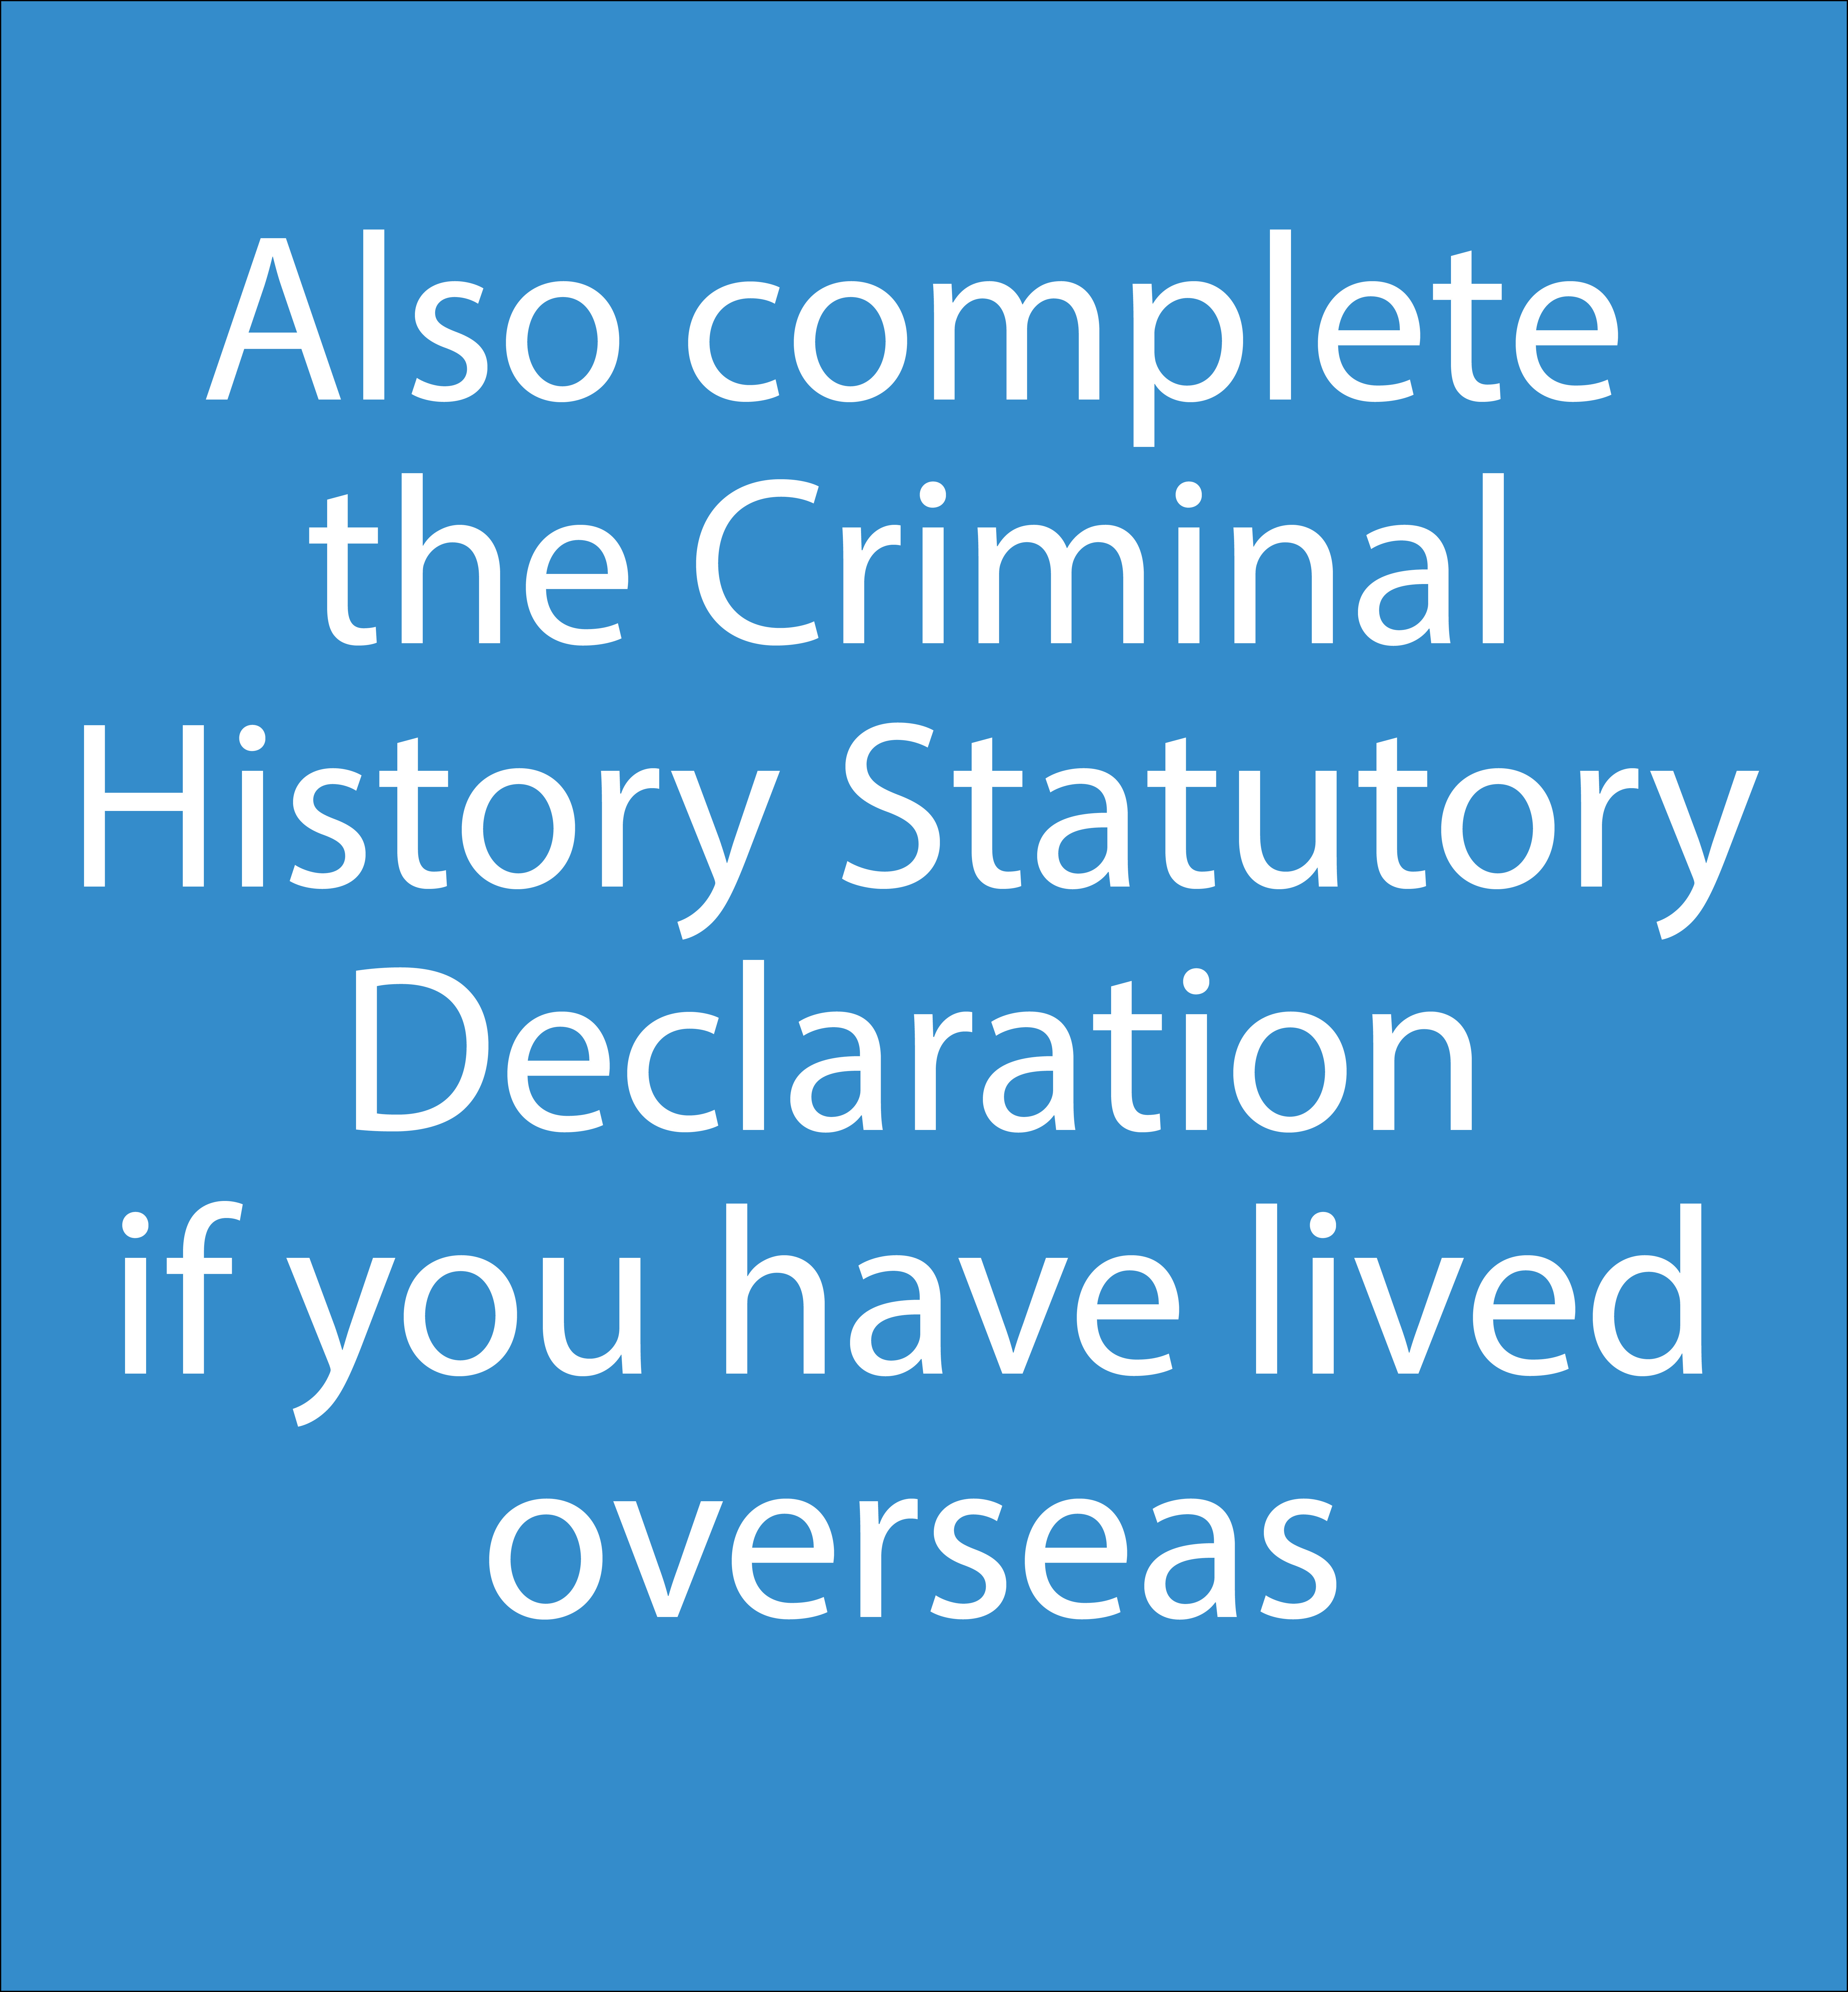 Also complete the Criminal History Statutory Declaration if you have lived overseas